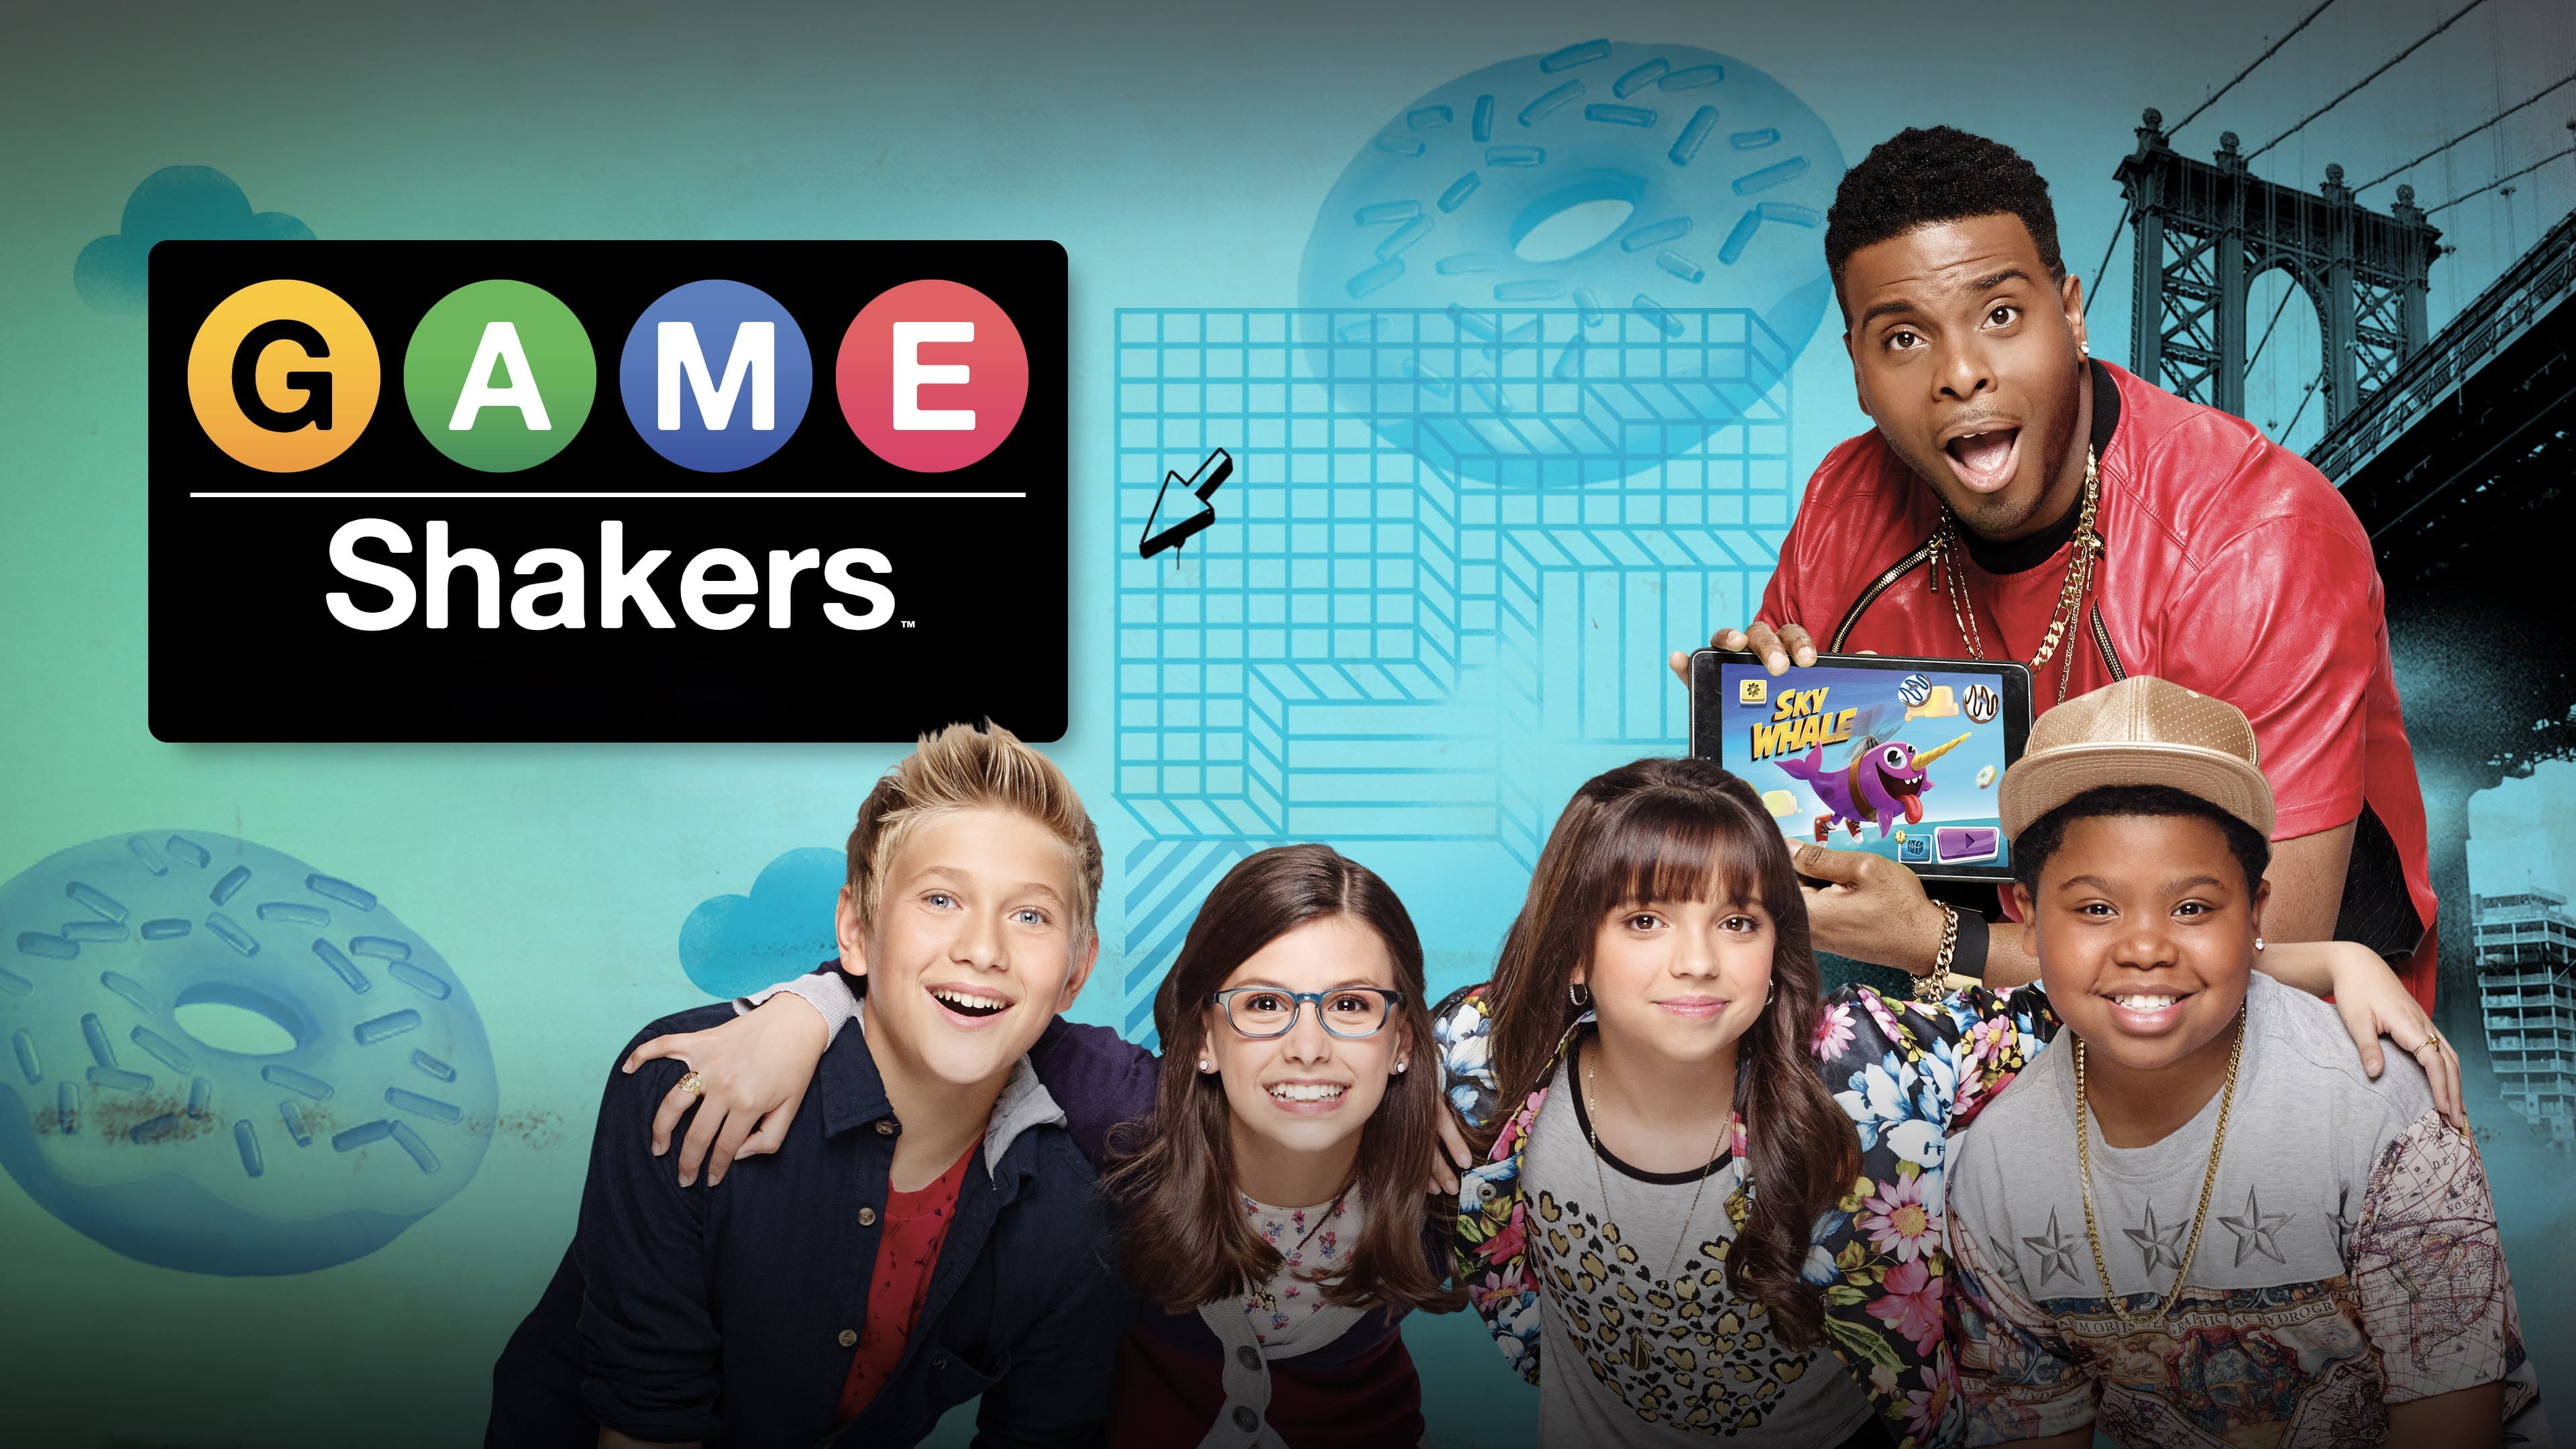 CC] Game Shakers 2015 The Complete Tv Series On Dvd Cree Cicchino, Ma –  HARDTOFINDTV